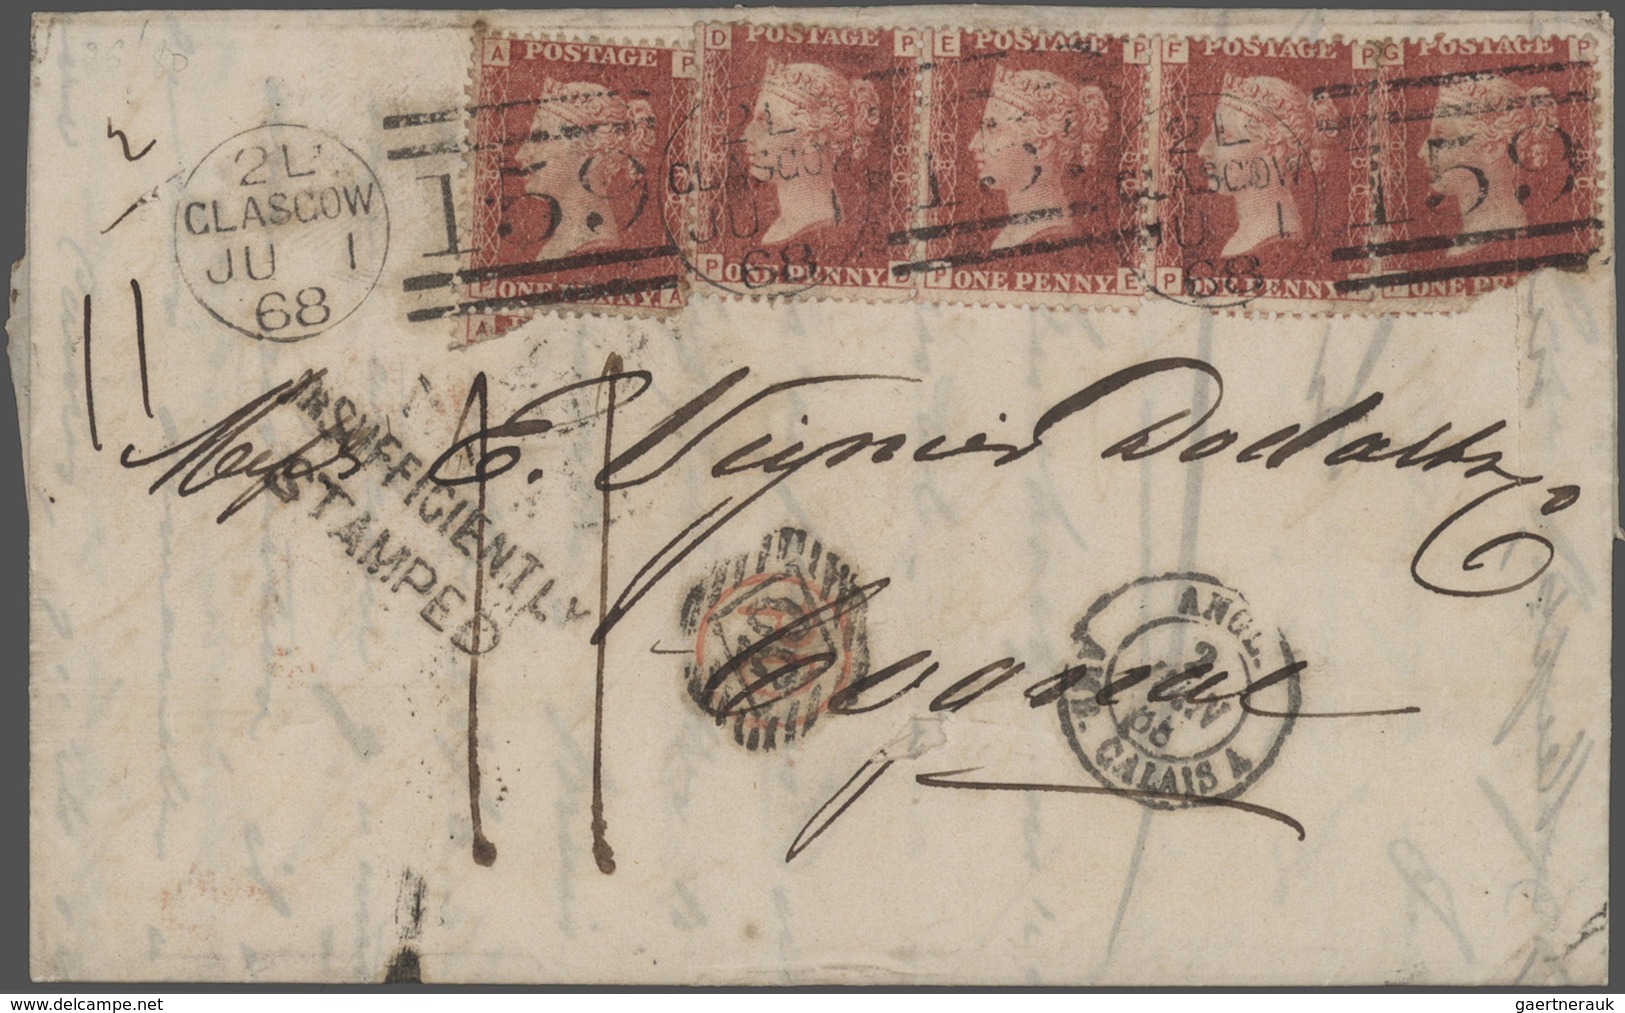 Großbritannien: 1836/1946: 77 better covers and postal stationeries including pre-philatelic, used A